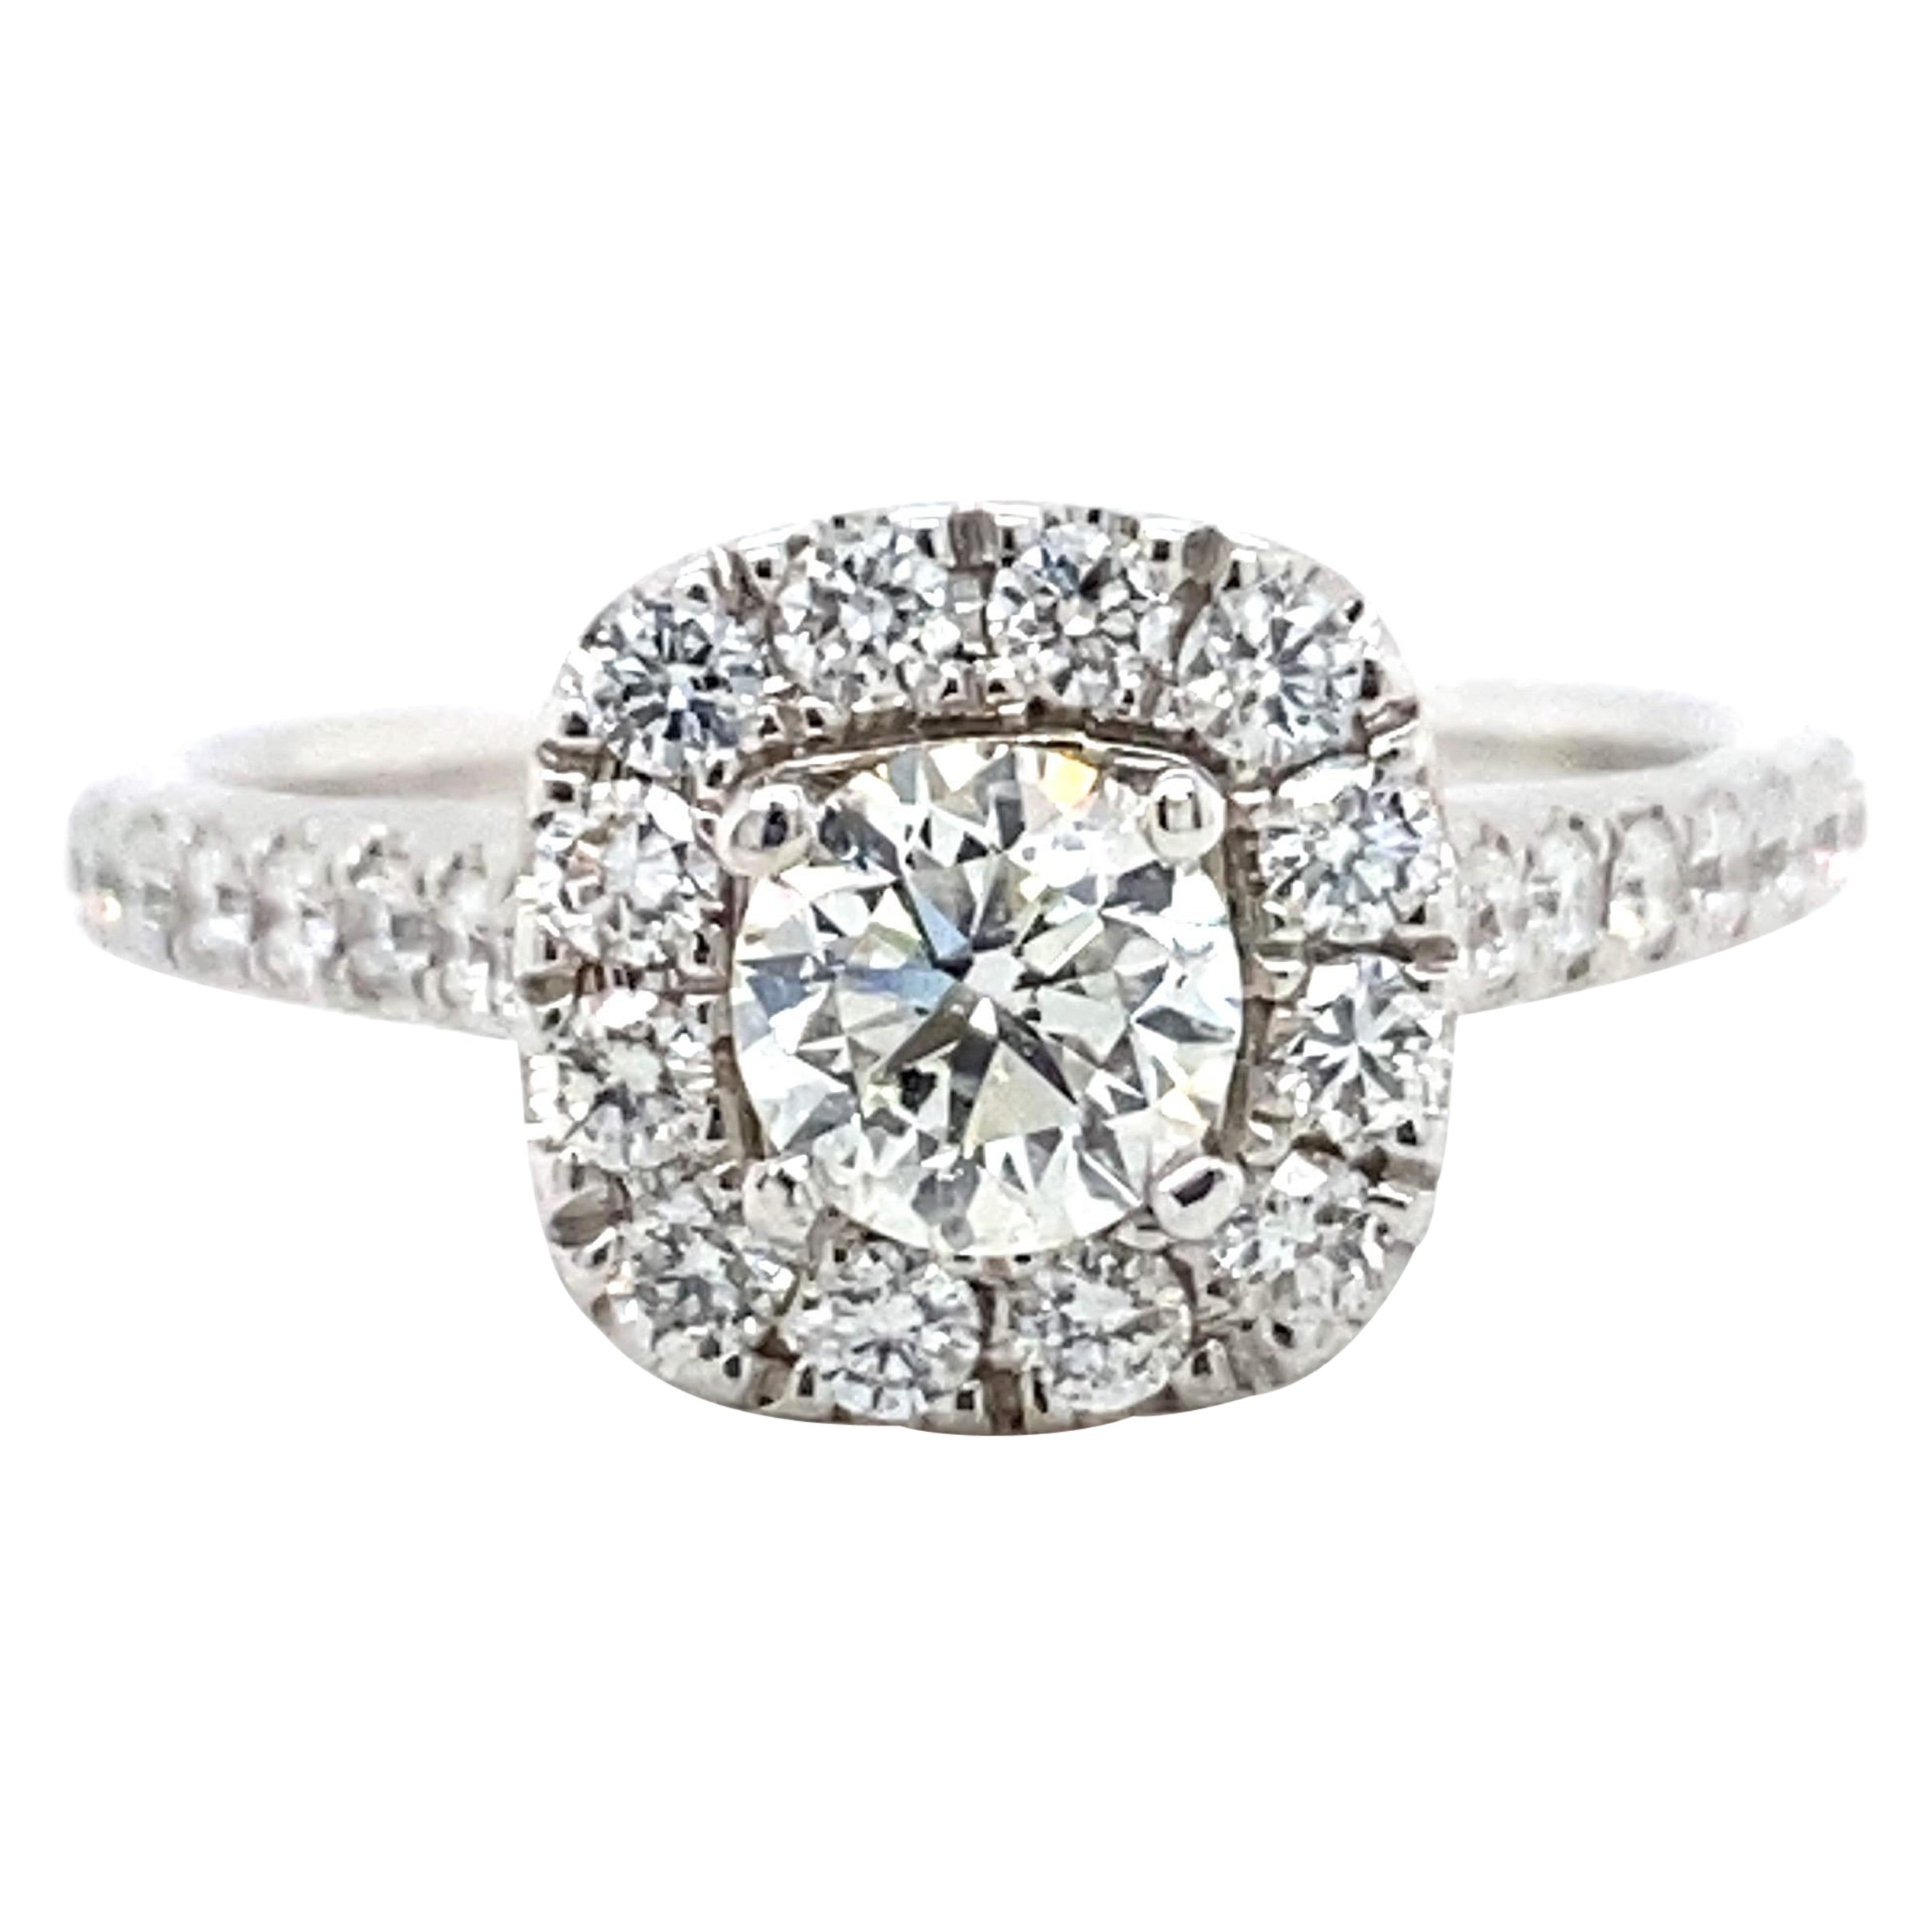 NEIL LANE Round Diamond Halo 1.27 tcw Engagement Ring in 14kt White Gold For Sale